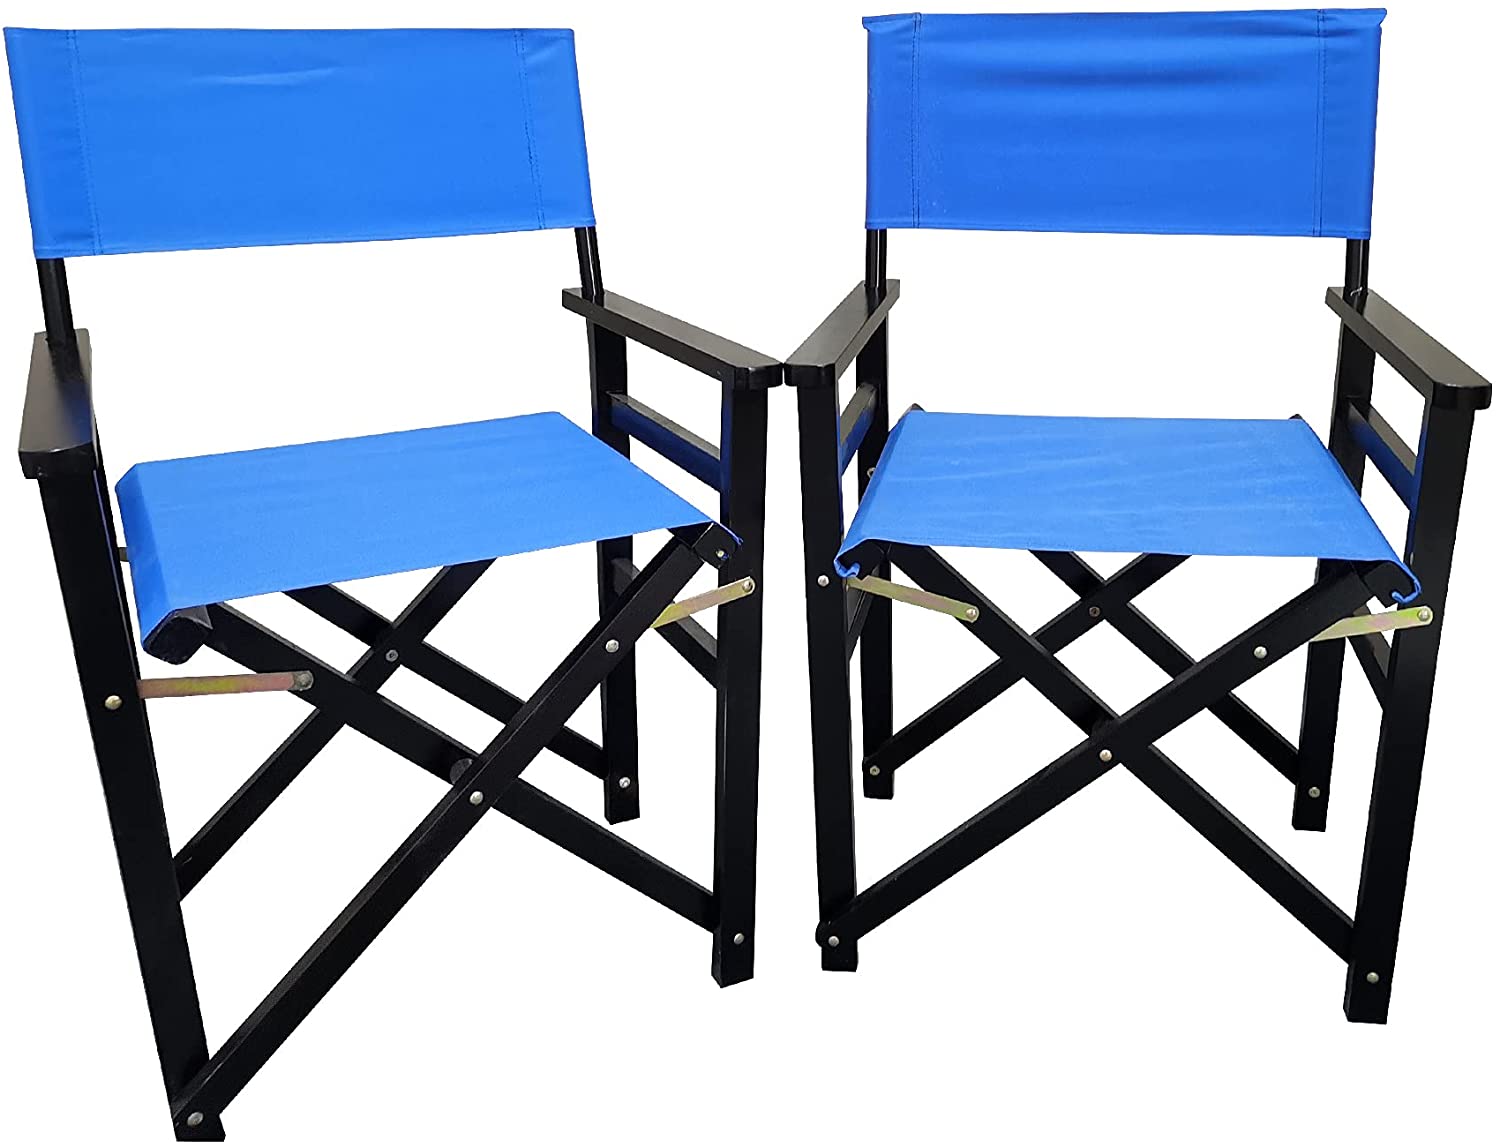 2 PCS Wooden Folding Director Chair, Outdoor Folding Wood Chair Set, Canvas Folding Chair for Balcony, Courtyard, Fishing, Camping (Blue) - image 1 of 15